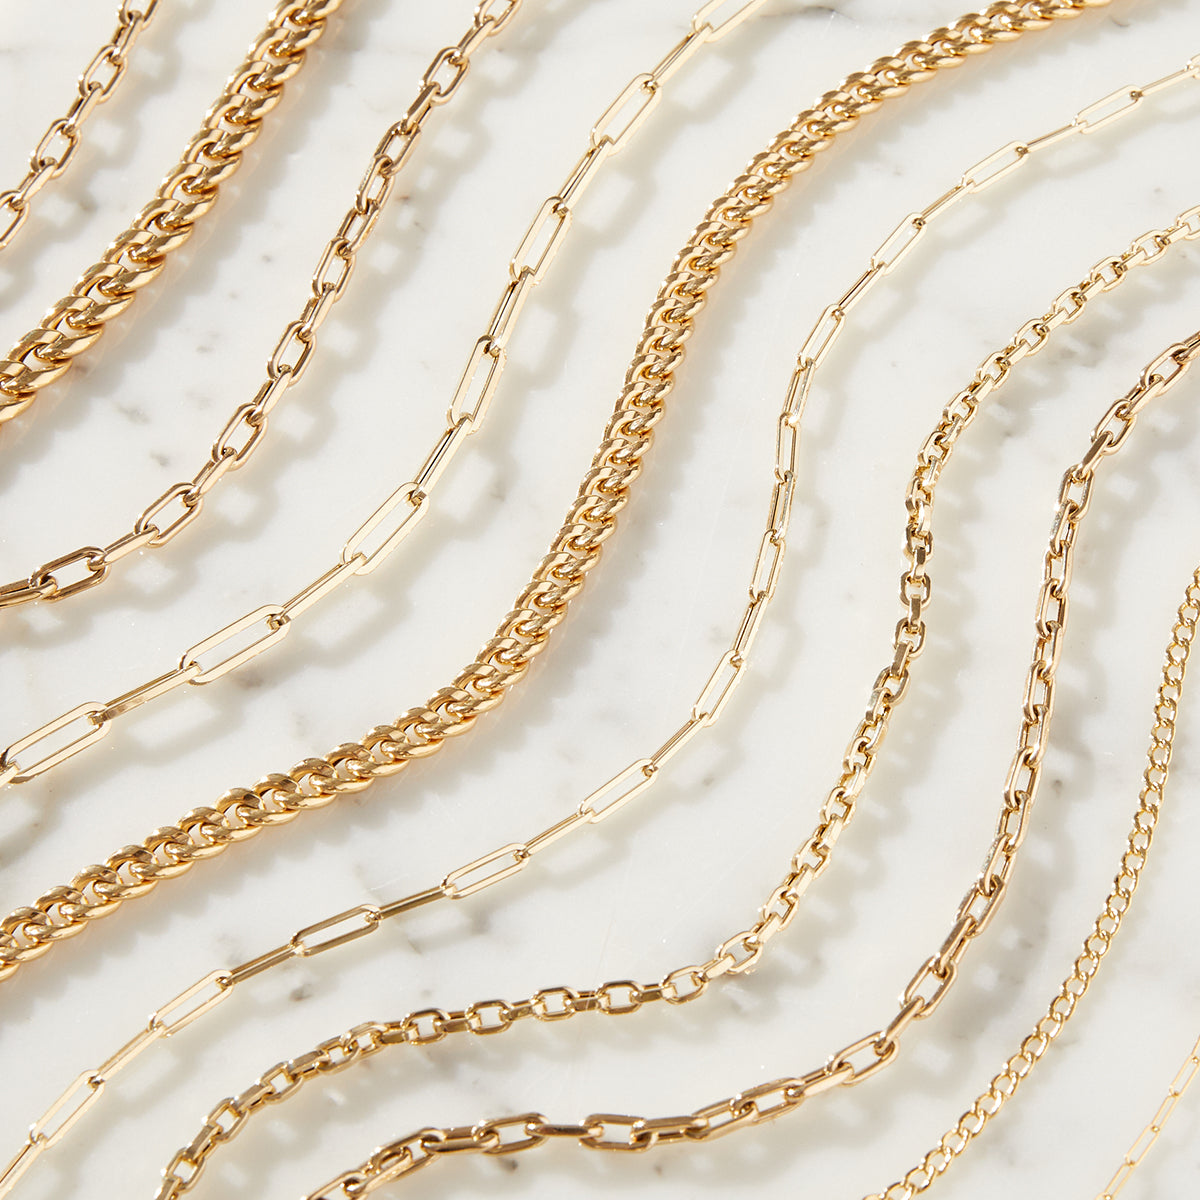 Solid 14k Gold Italian Paperclip Chain Necklace 2mm, 3mm, 4mm, 5mm Women, 14k  Gold Chain Necklace, Italian Paperclip Chain, 14k Paperclips - Etsy